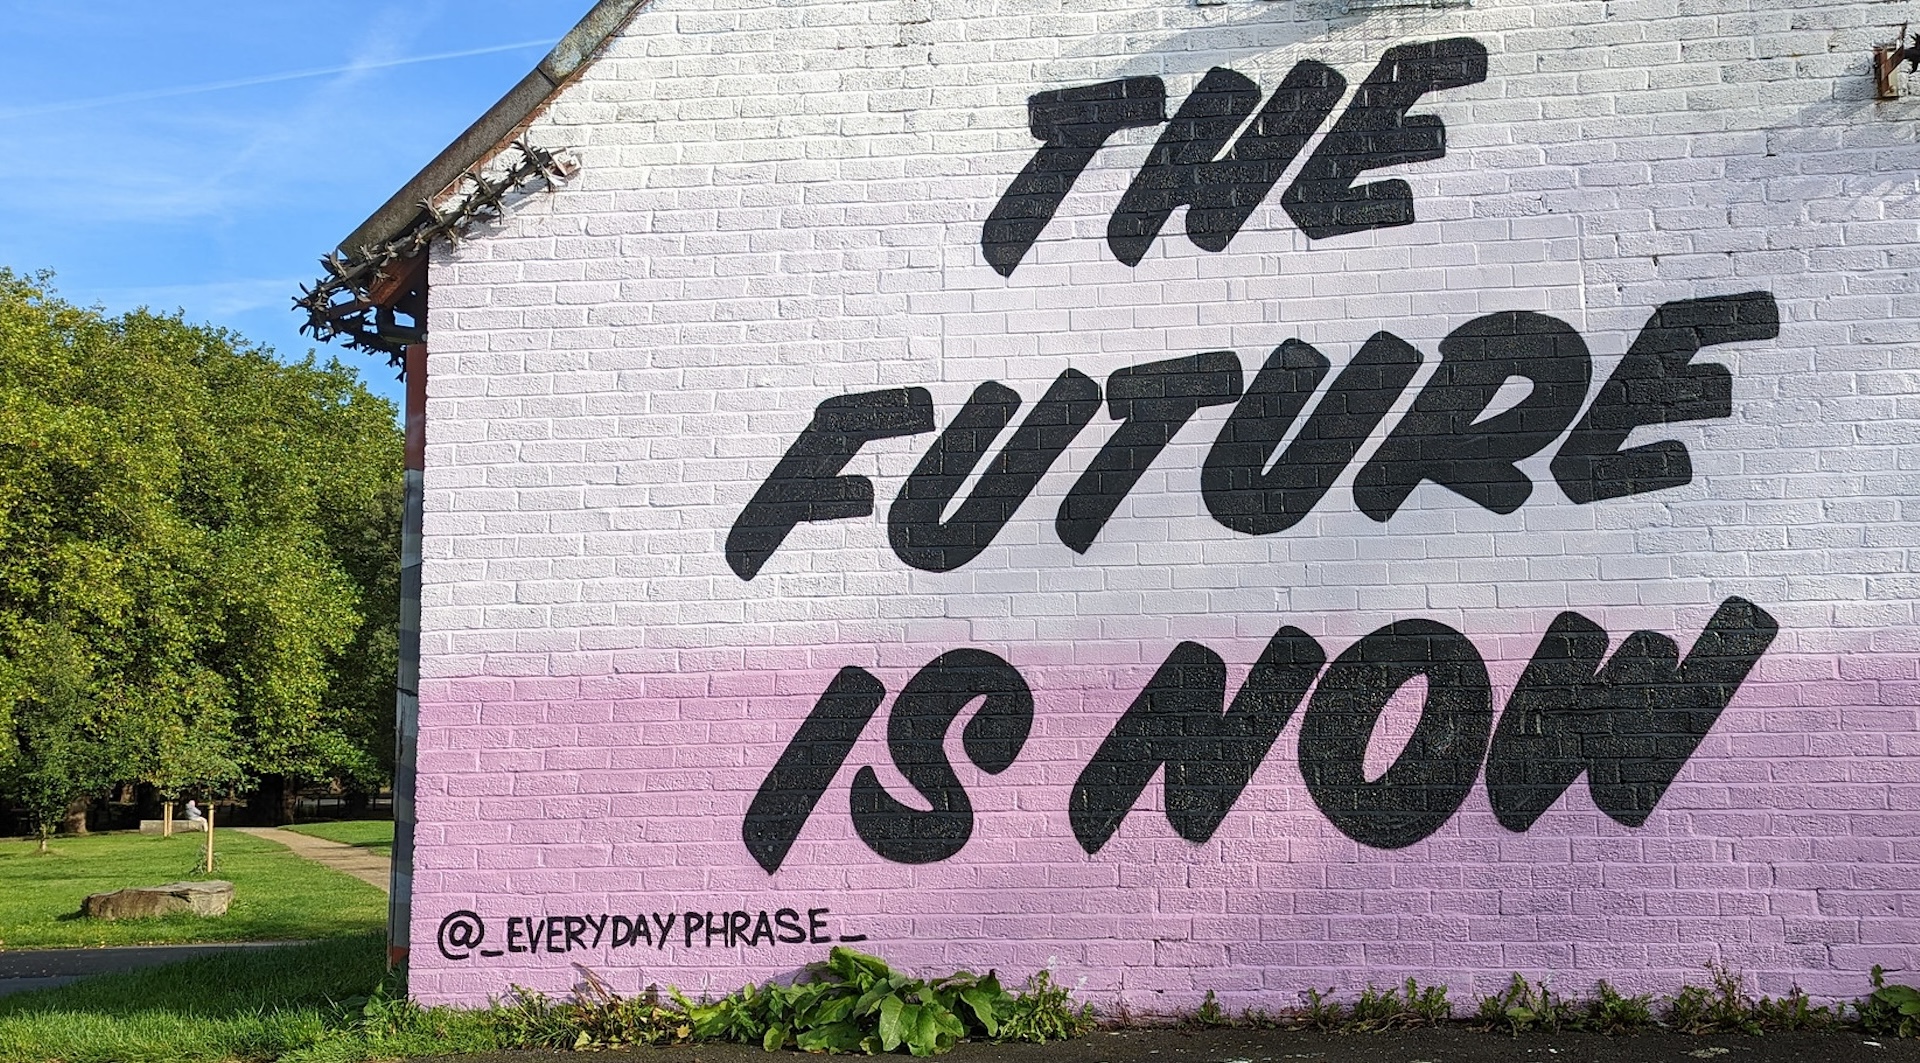 An image of a building with "The Future is Now" painted on its side. Publishers are anxious about 2024. We see opportunities in rethinking and rebalancing their approaches to audience acquisition, reader revenue and AI. Photo by Dunk from Flickr